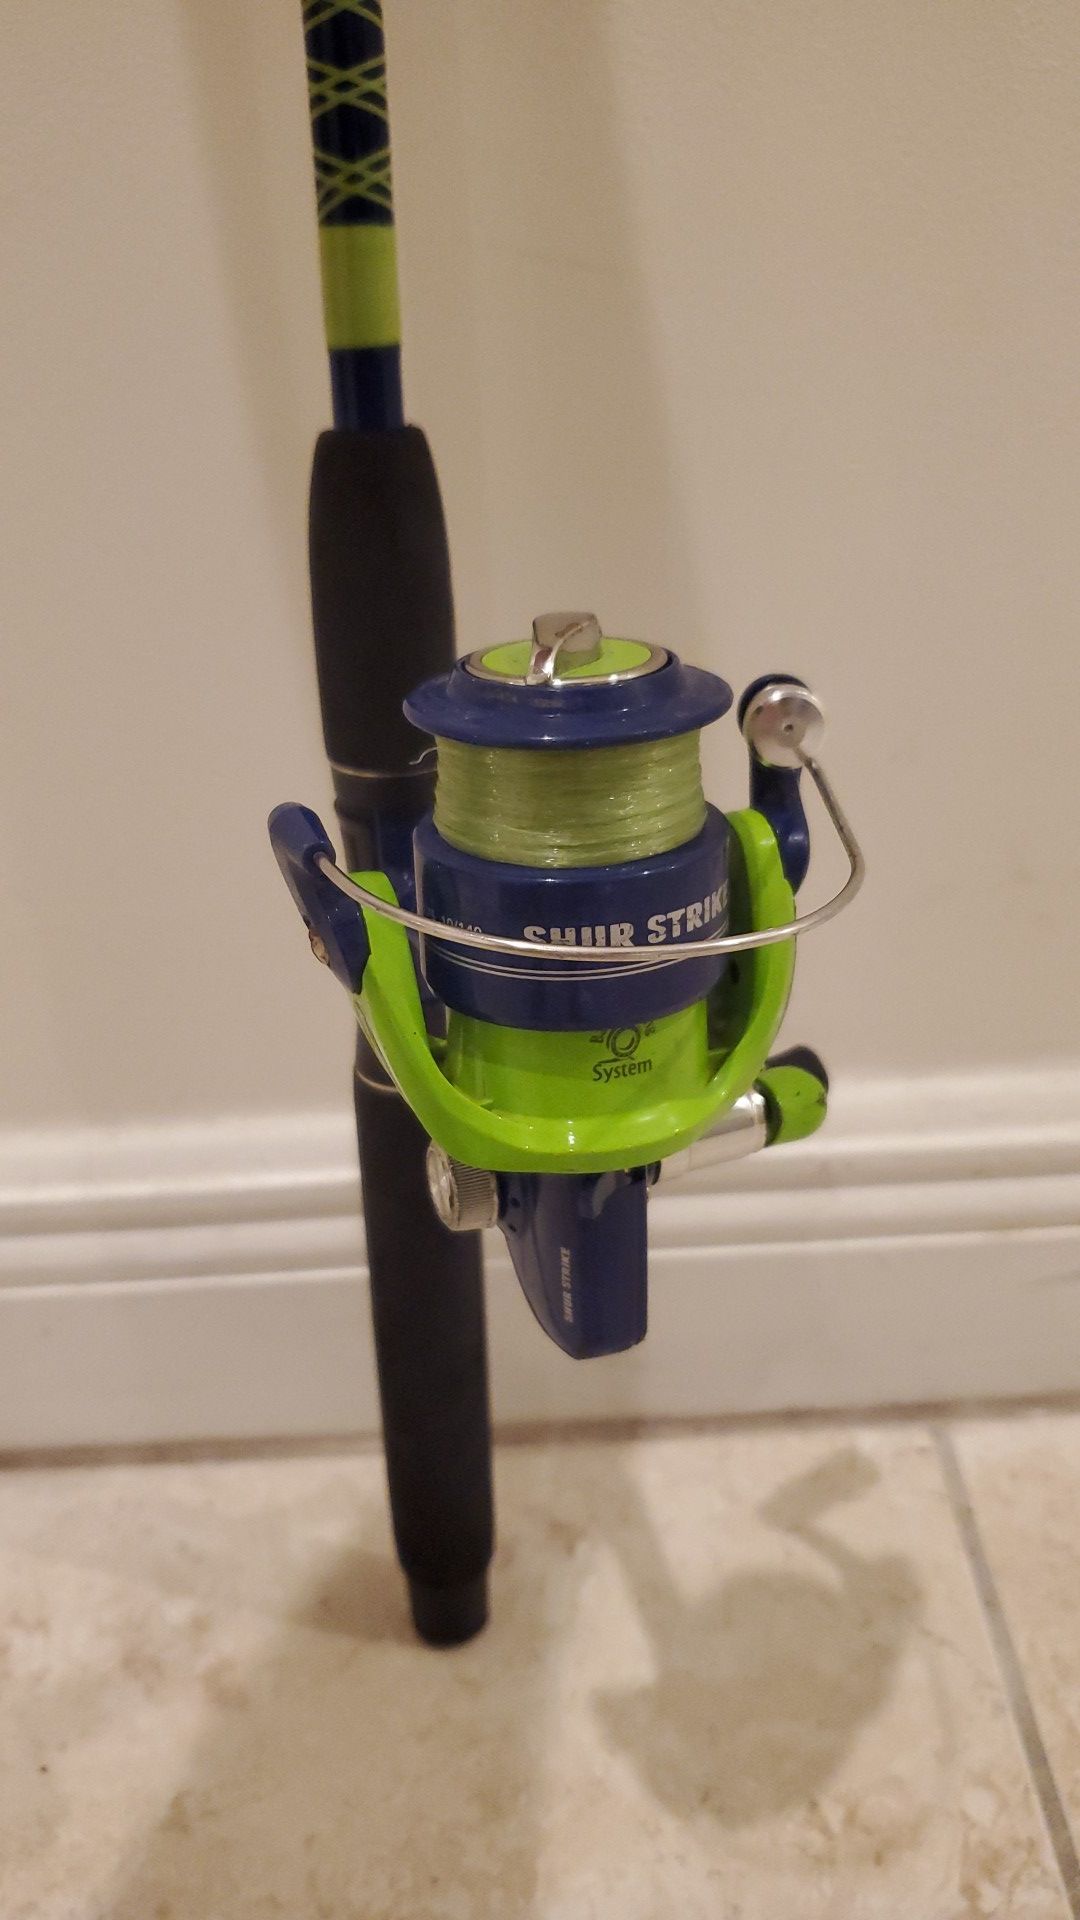 Shur Strike fishing rod pole and reel with a tackle box